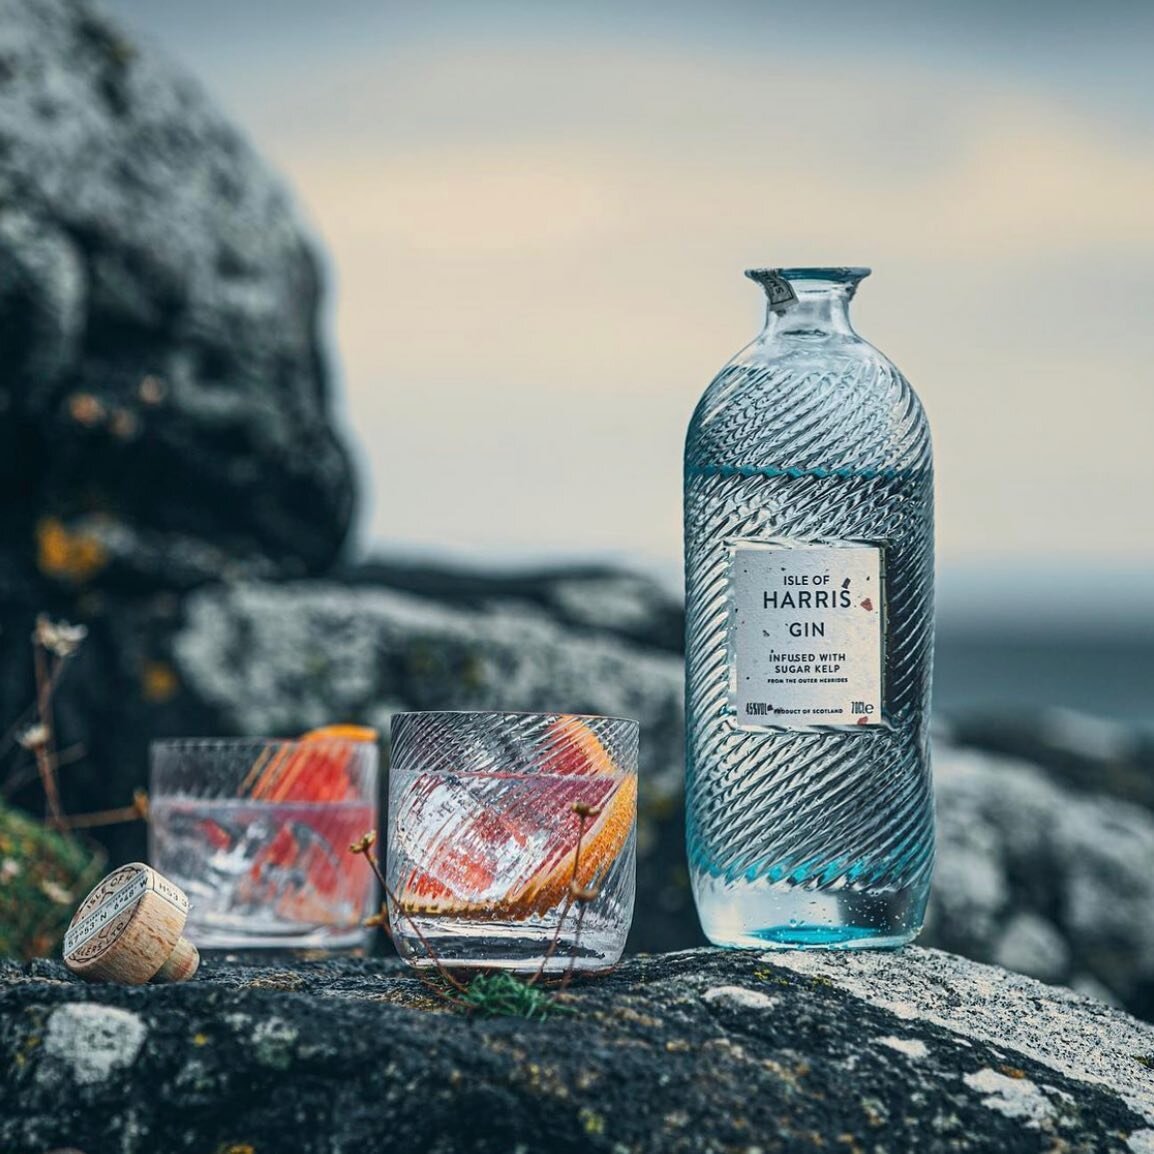 Isle of Harris Gin is the inaugural spirit release from the distillery which opened in late 2015.

The team worked with an ethnobotanist to analyse dozens of potential botanicals from the island&rsquo;s moors and machair before turning to the sea. Su